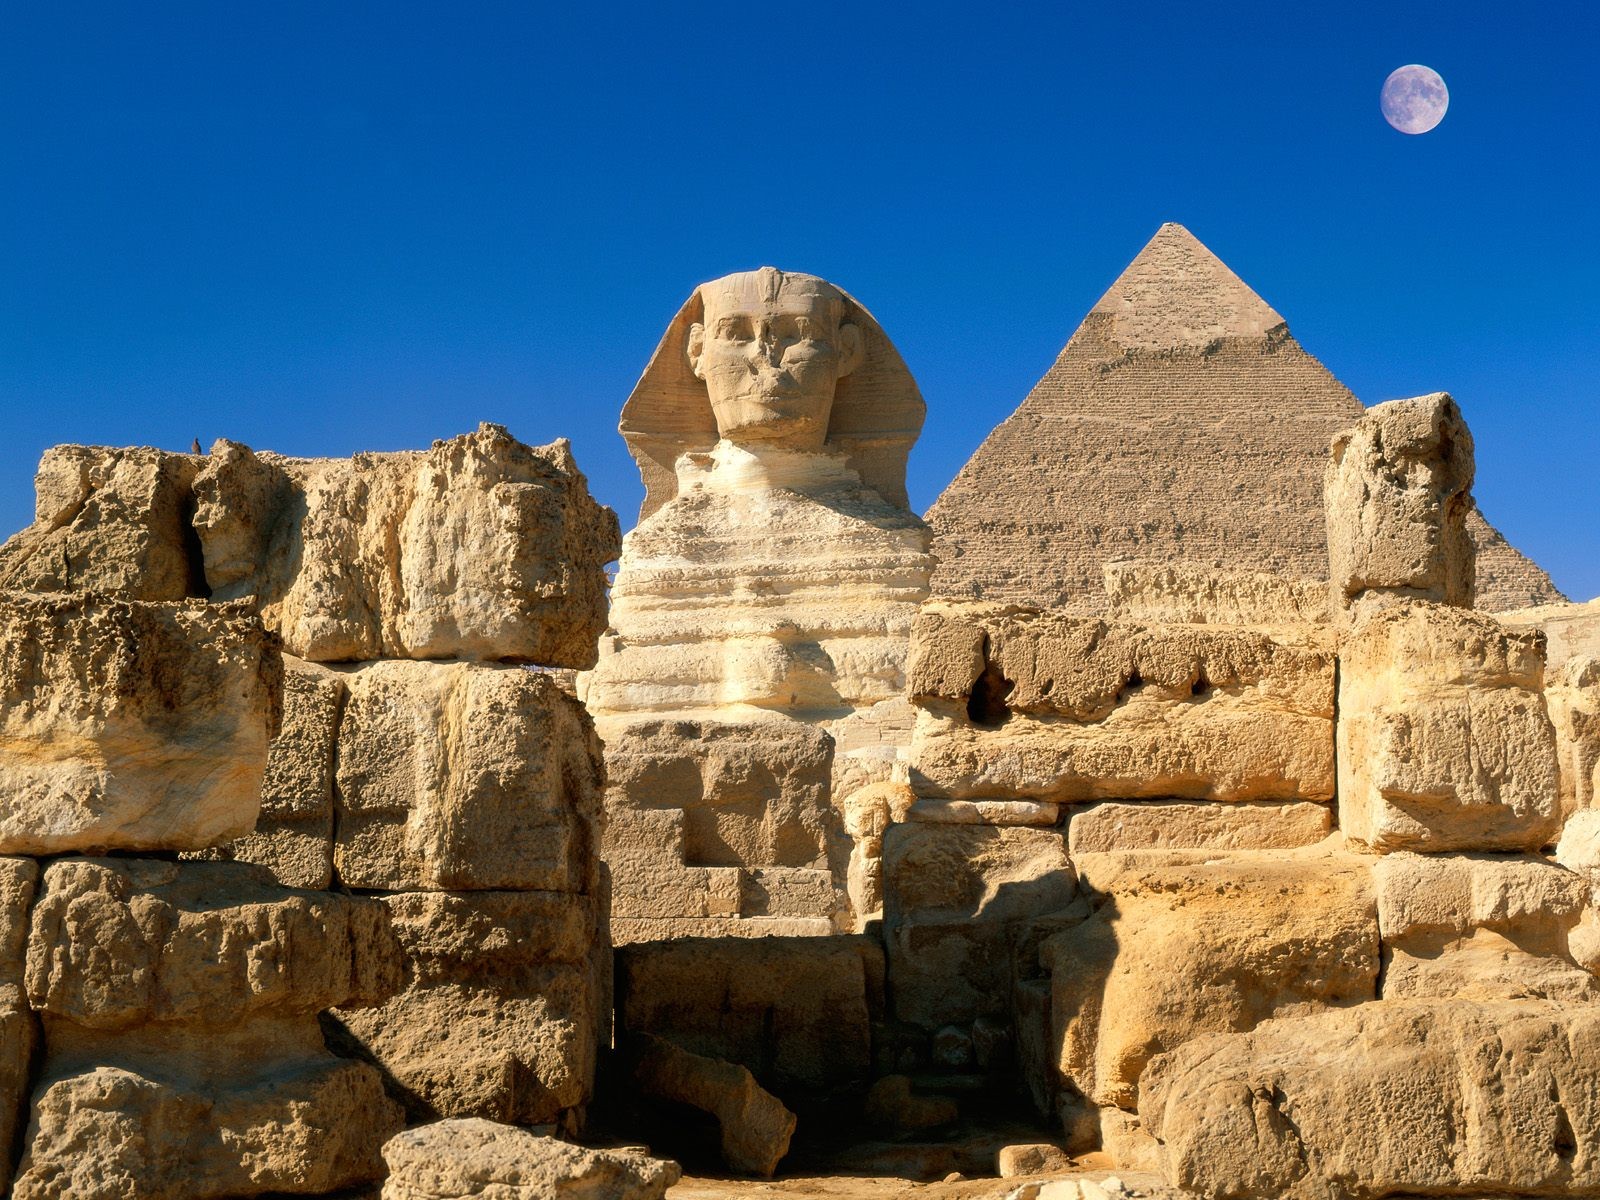 General 1600x1200 Sphinx of Giza Egypt ancient monuments pyramid Moon landmark World Heritage Site Africa